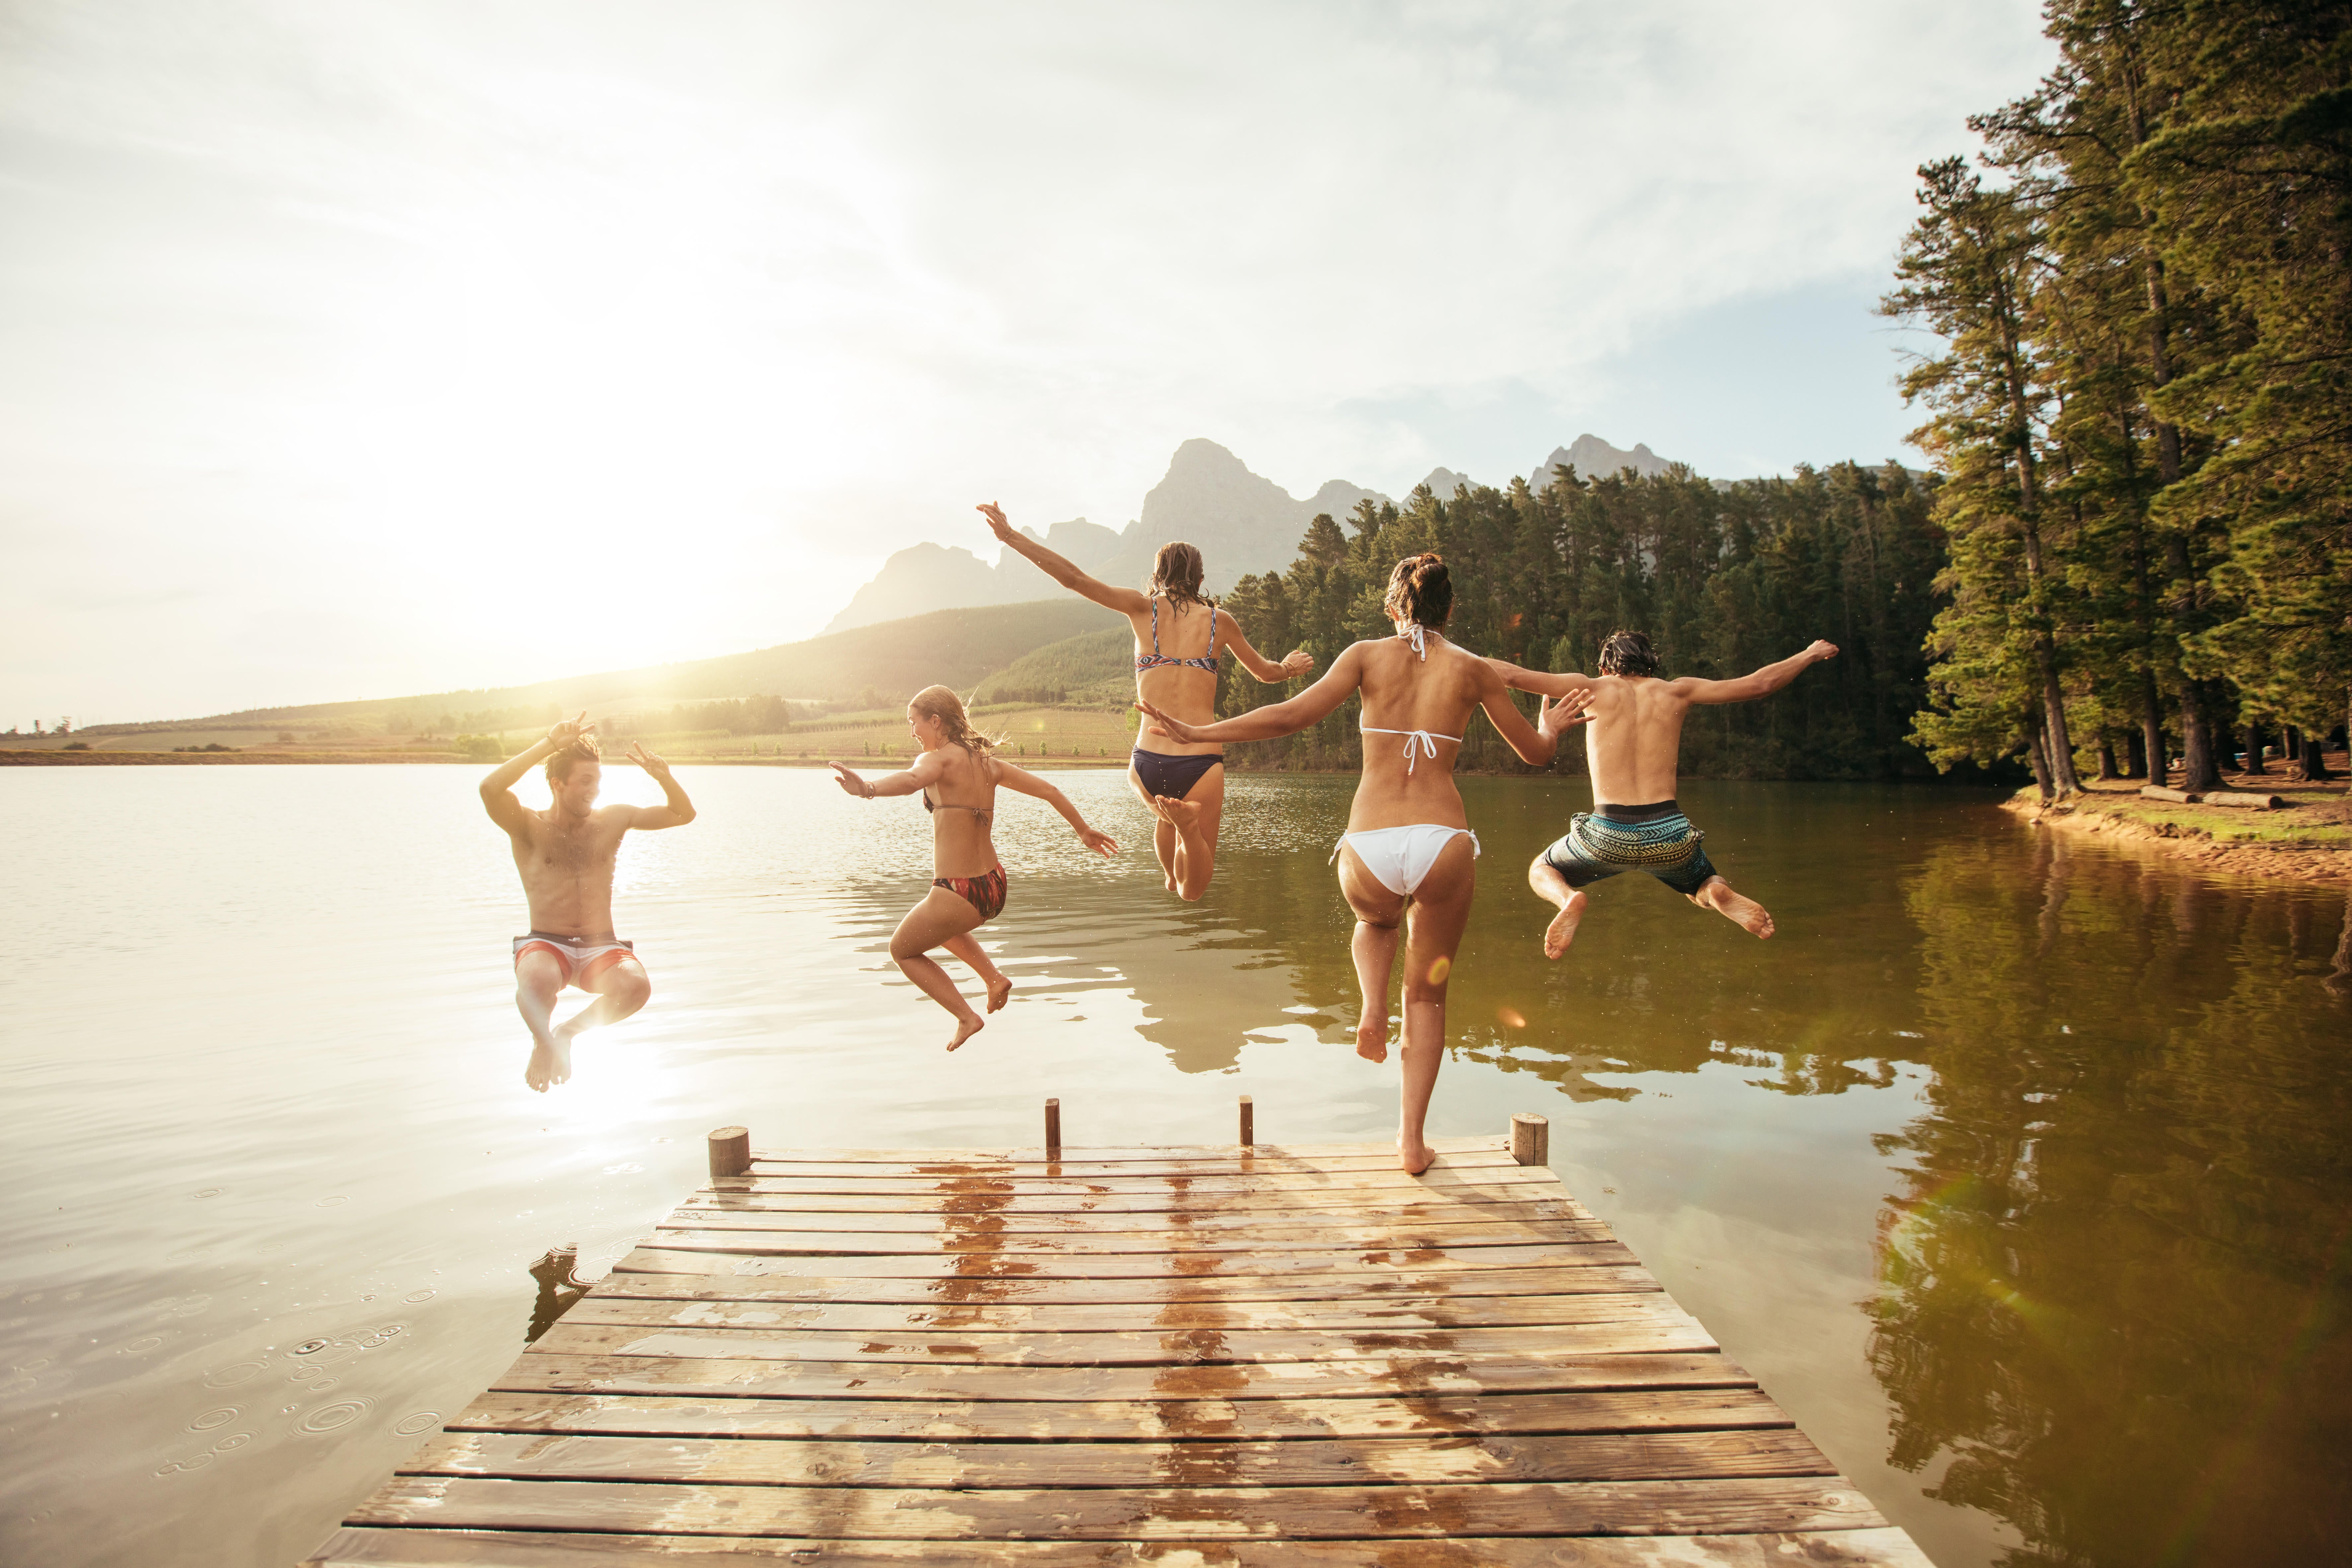 Friends leaping into a lake